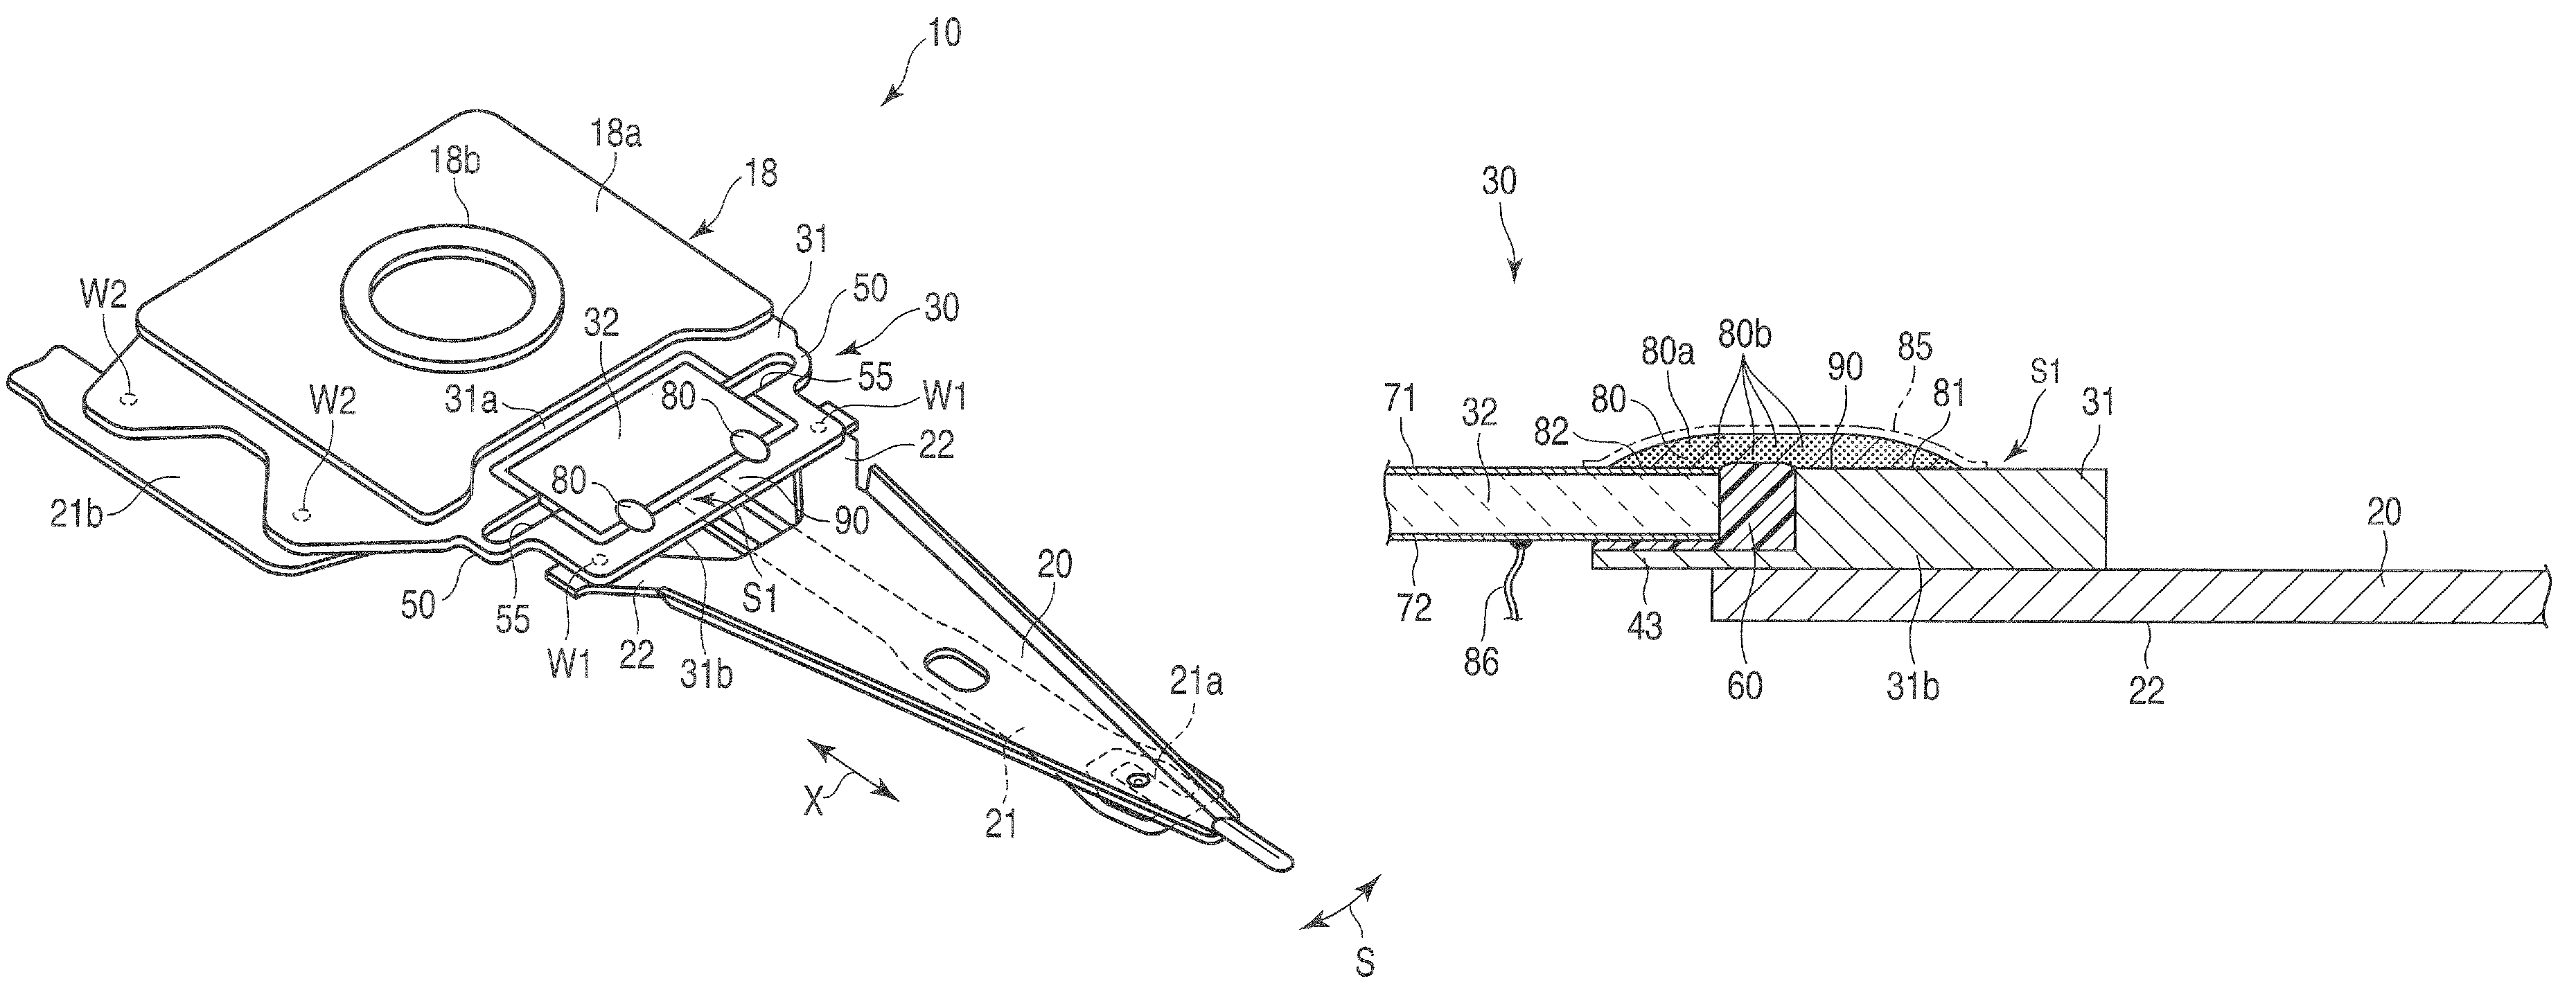 Electronic apparatus and disk drive suspension